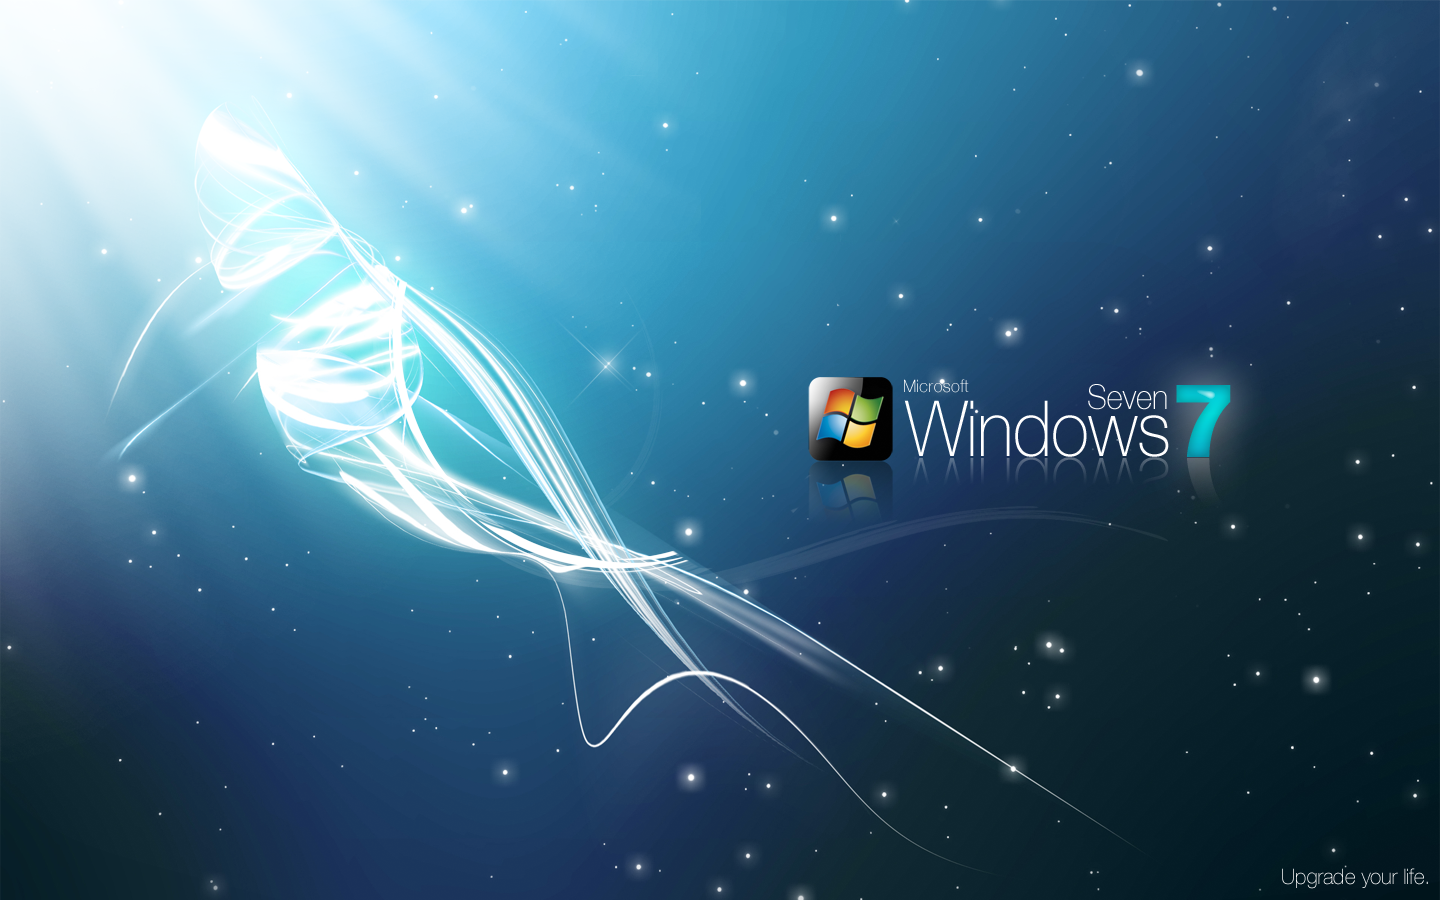 Windows 7 Made Available for Holiday Sales